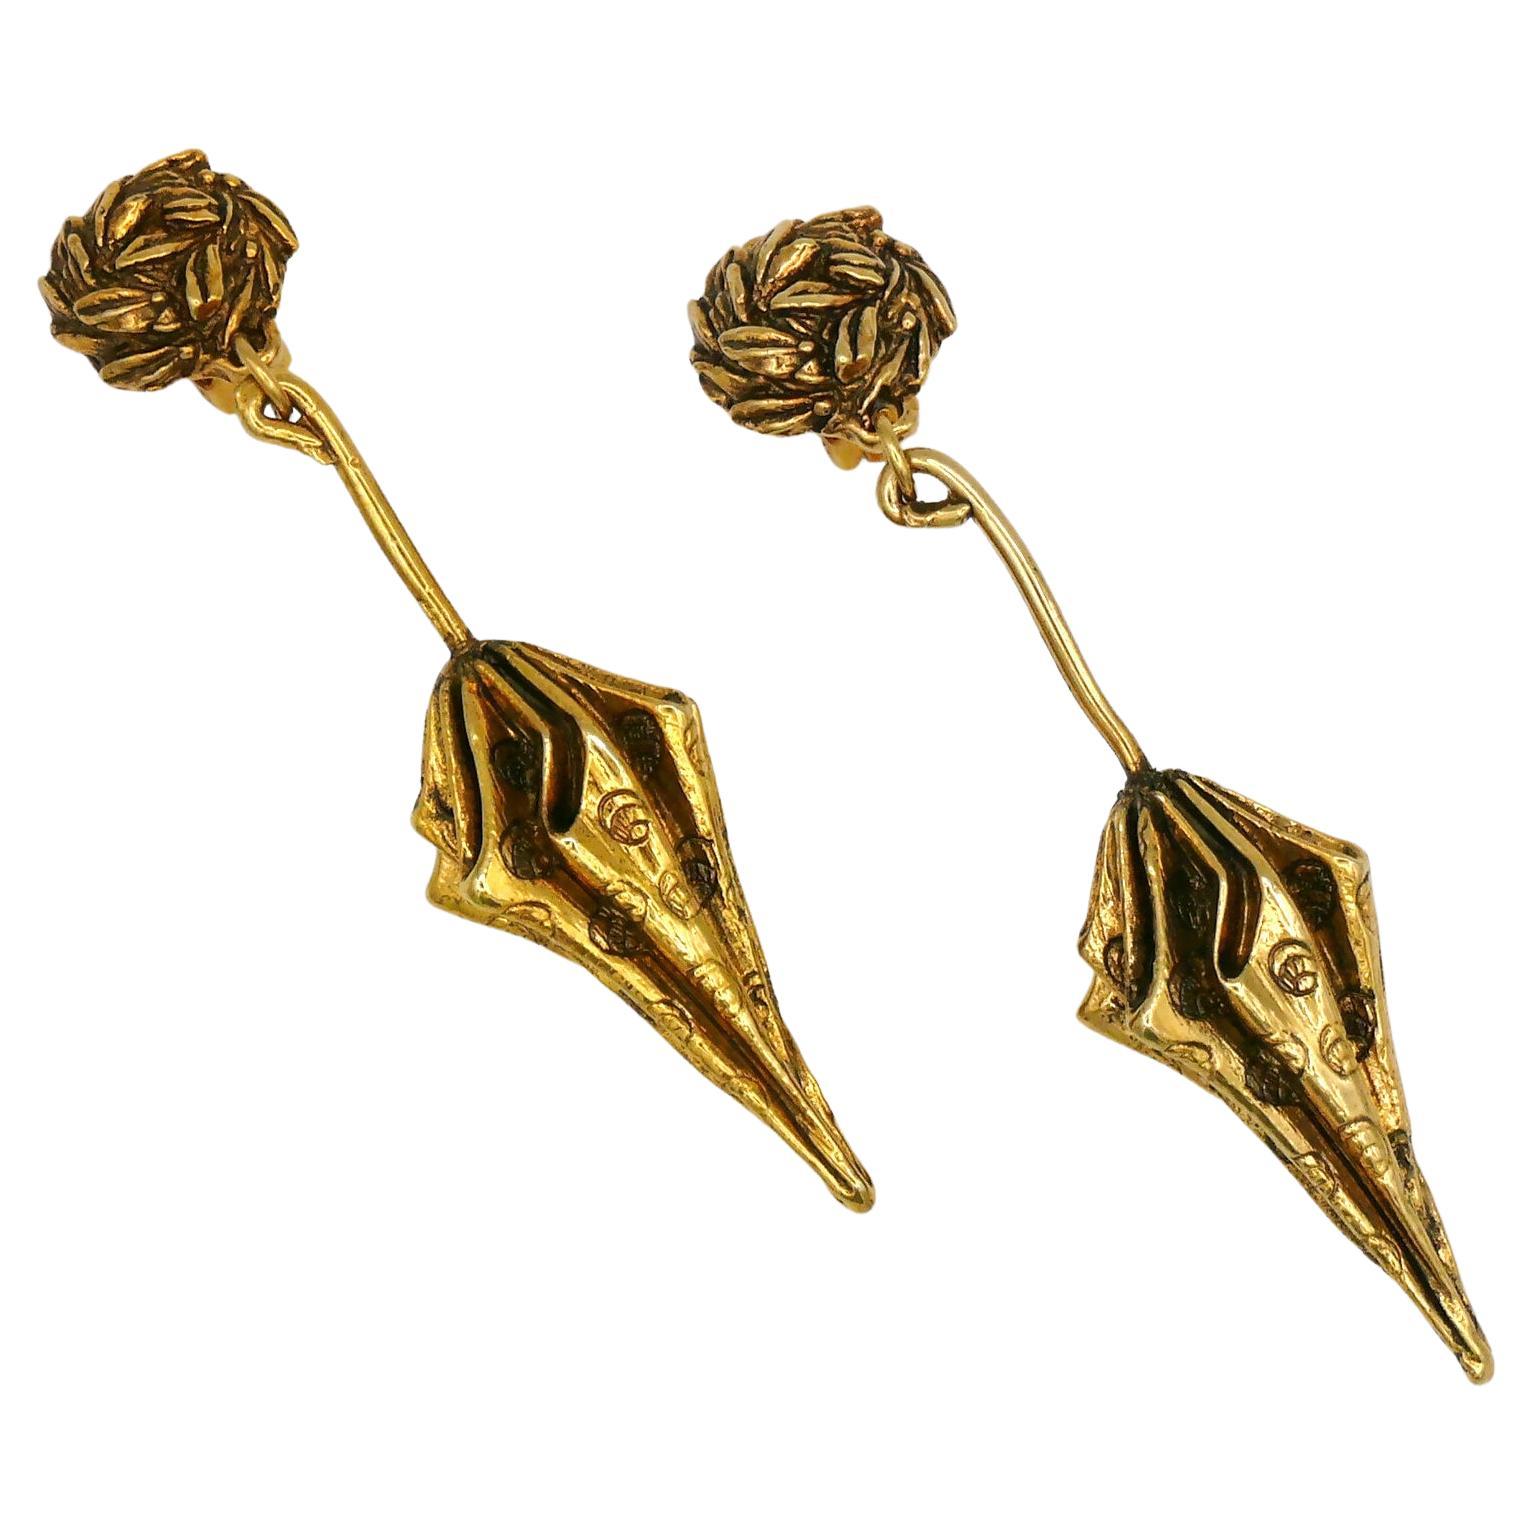 Chantal Thomass (Attributed to) Vintage Umbrella Dangling Earrings For Sale